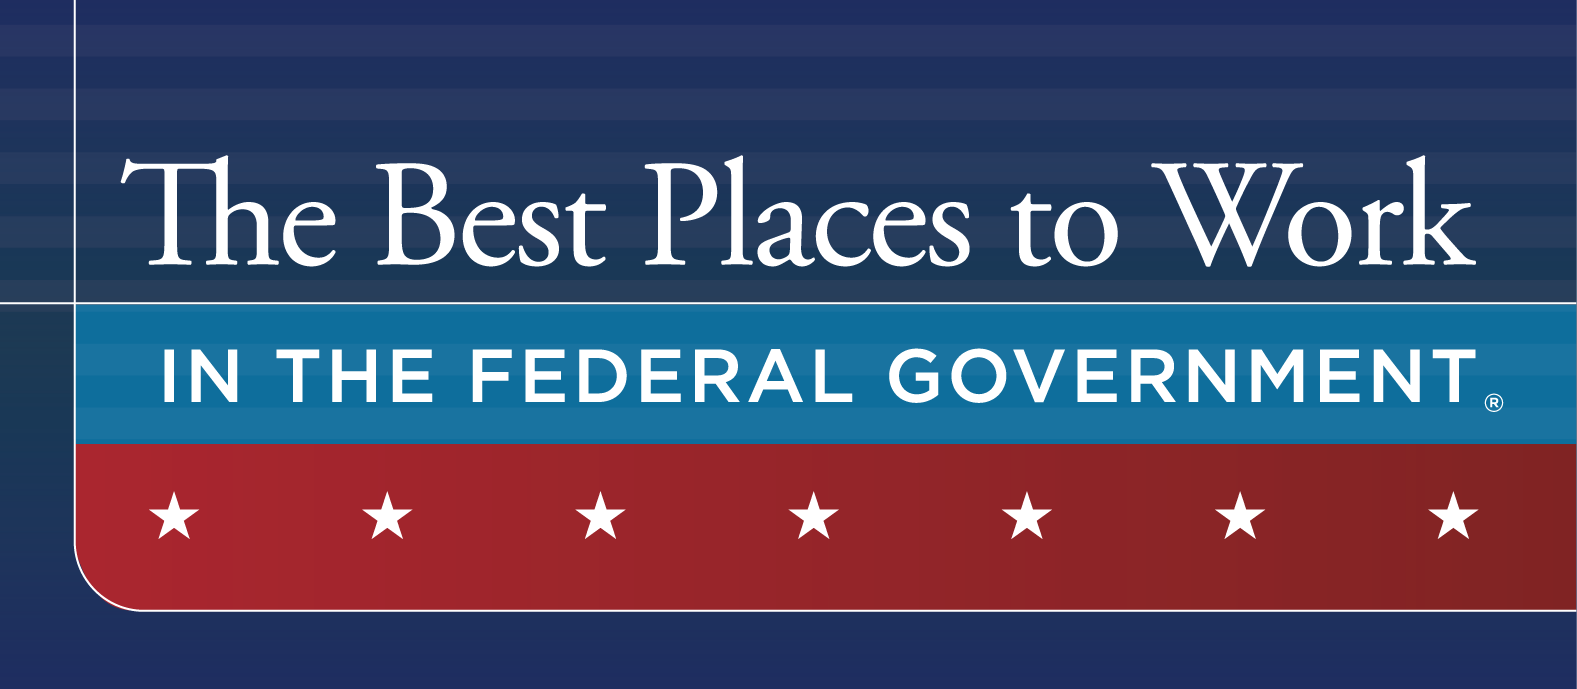 The PSJD Blog » What are the "Best Places to Work" in the Federal